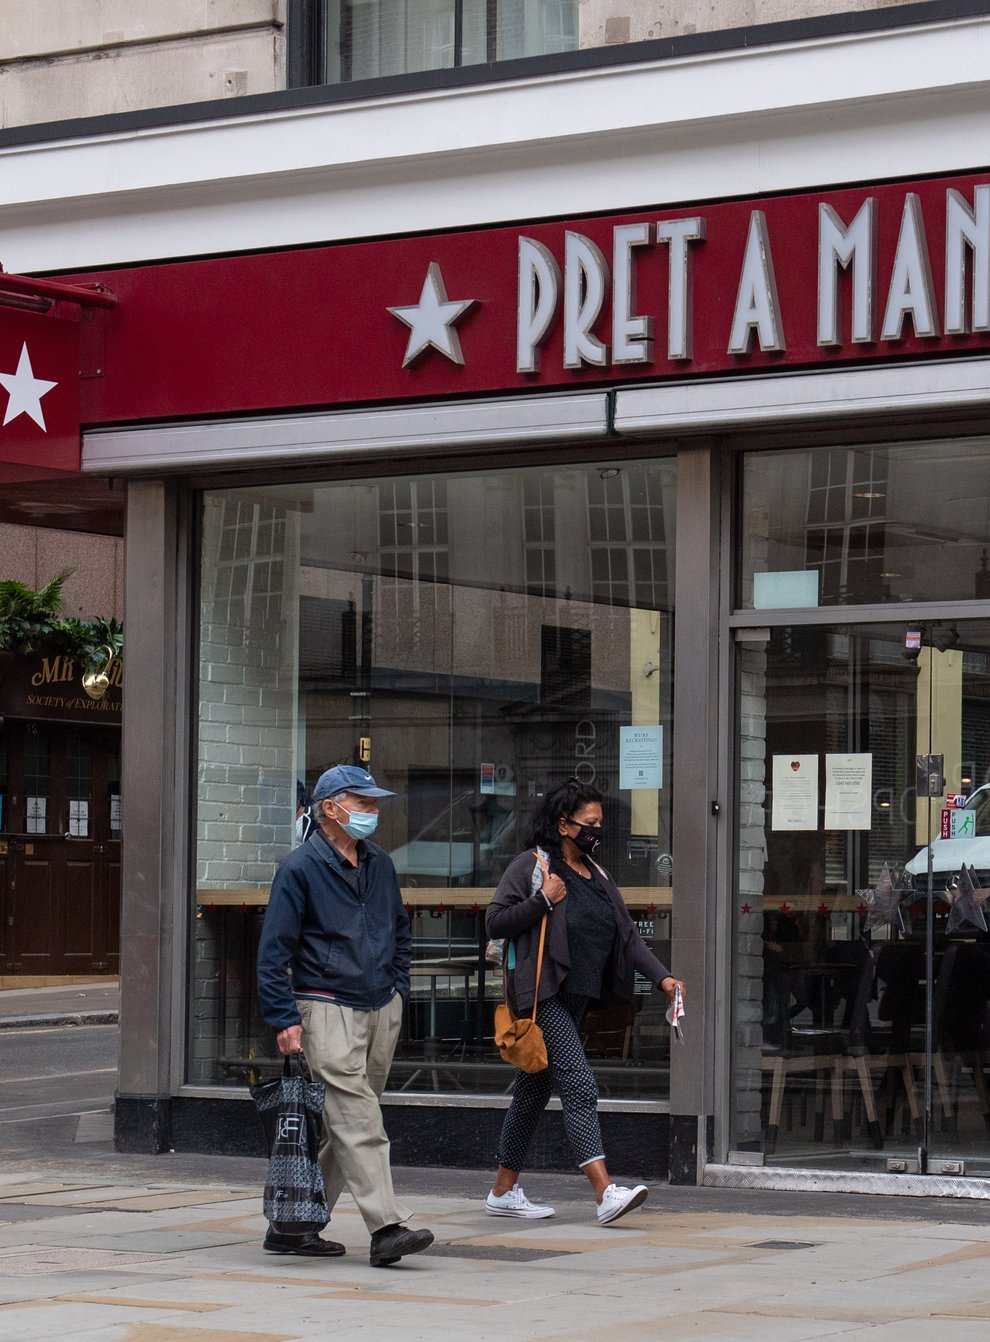 People wearing protective face masks walk past a closed Pret a Manger shop